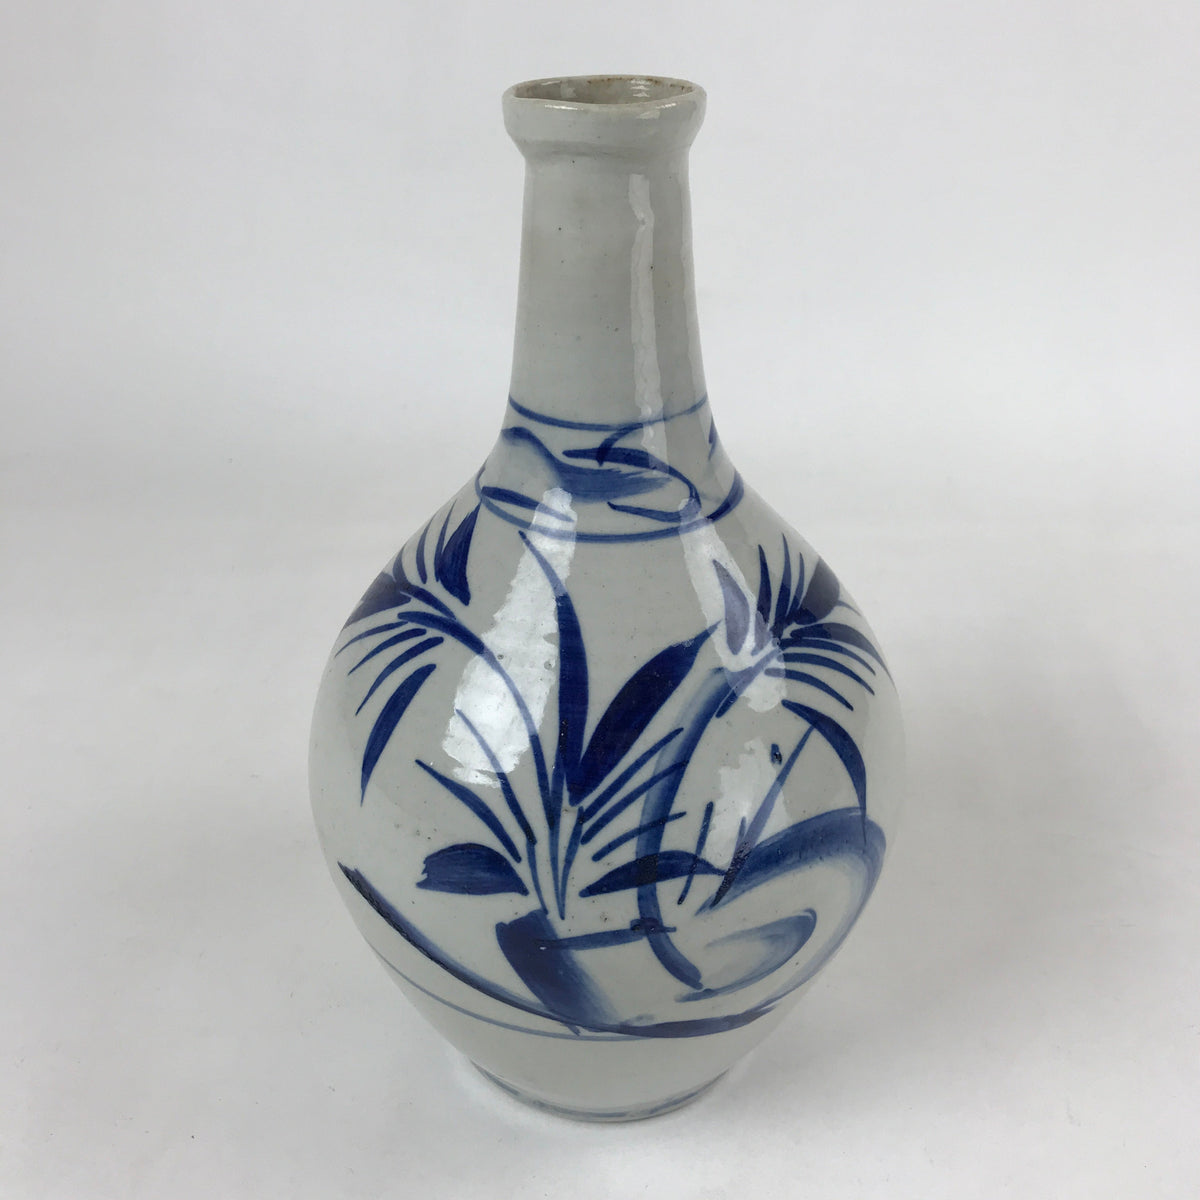 Midnight Blue and White Japanese Vase, Suiroku Collection